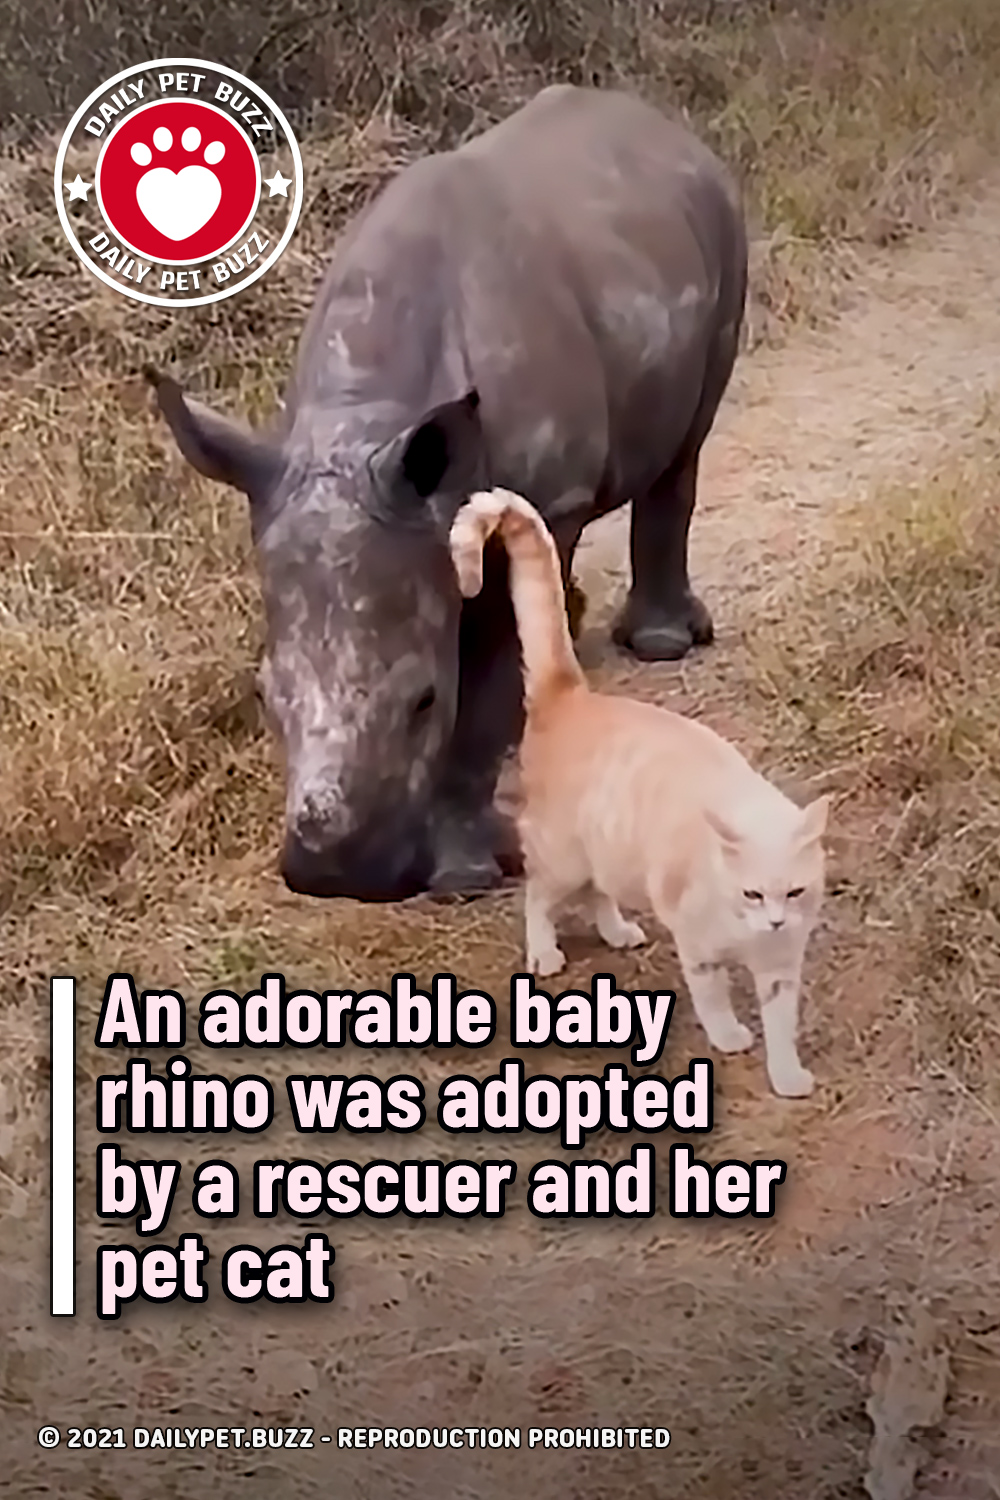 An adorable baby rhino was adopted by a rescuer and her pet cat